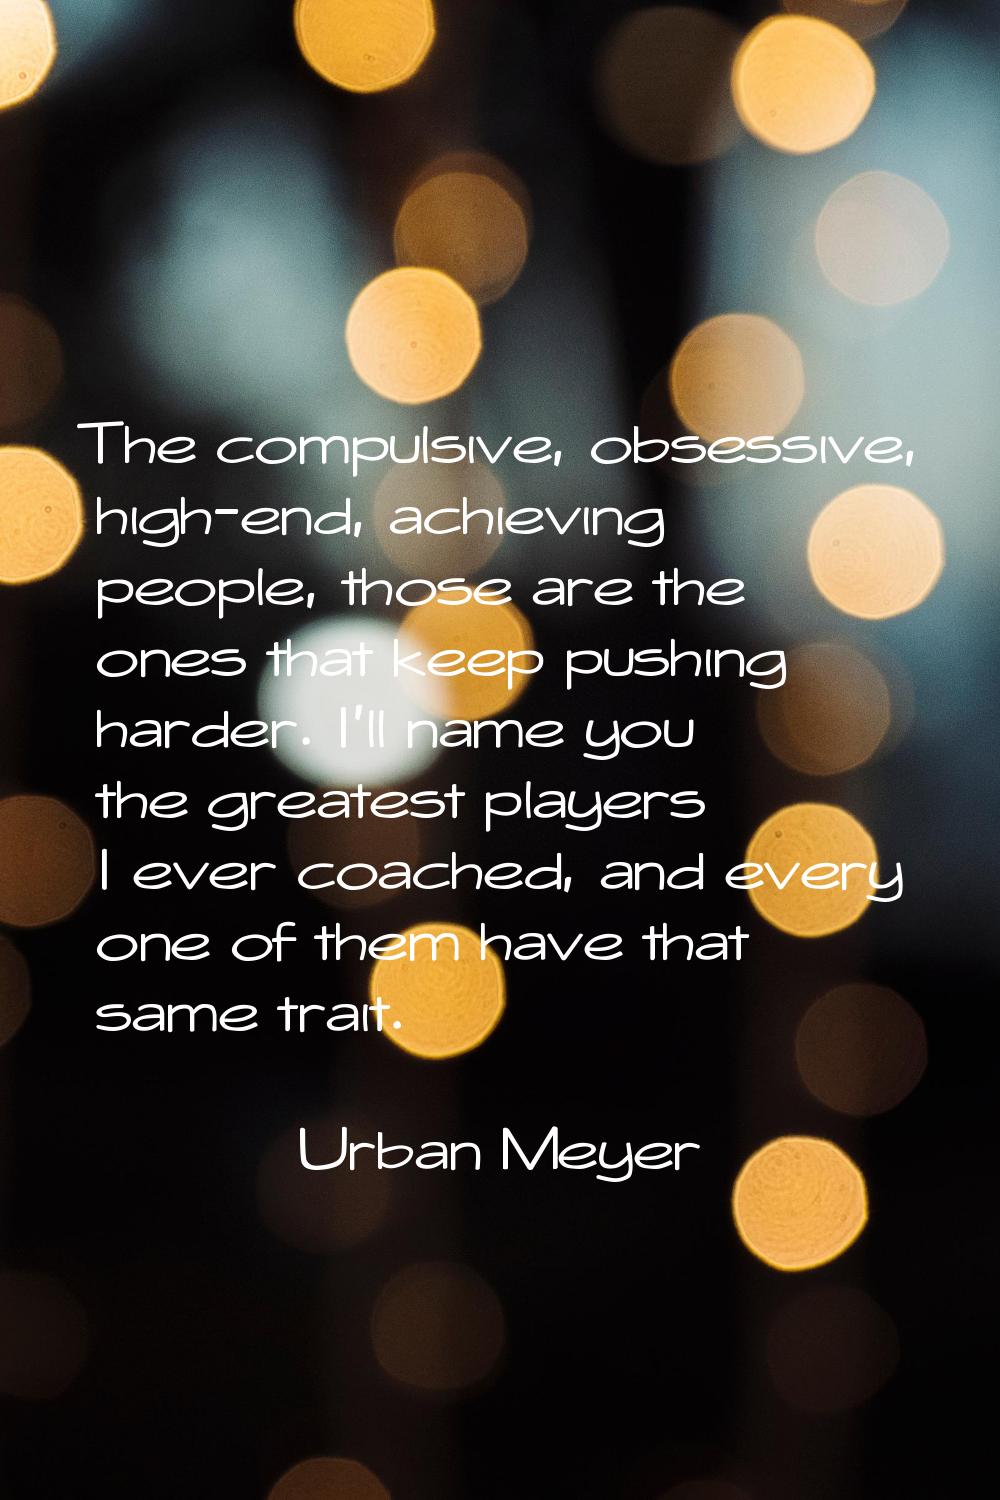 The compulsive, obsessive, high-end, achieving people, those are the ones that keep pushing harder.